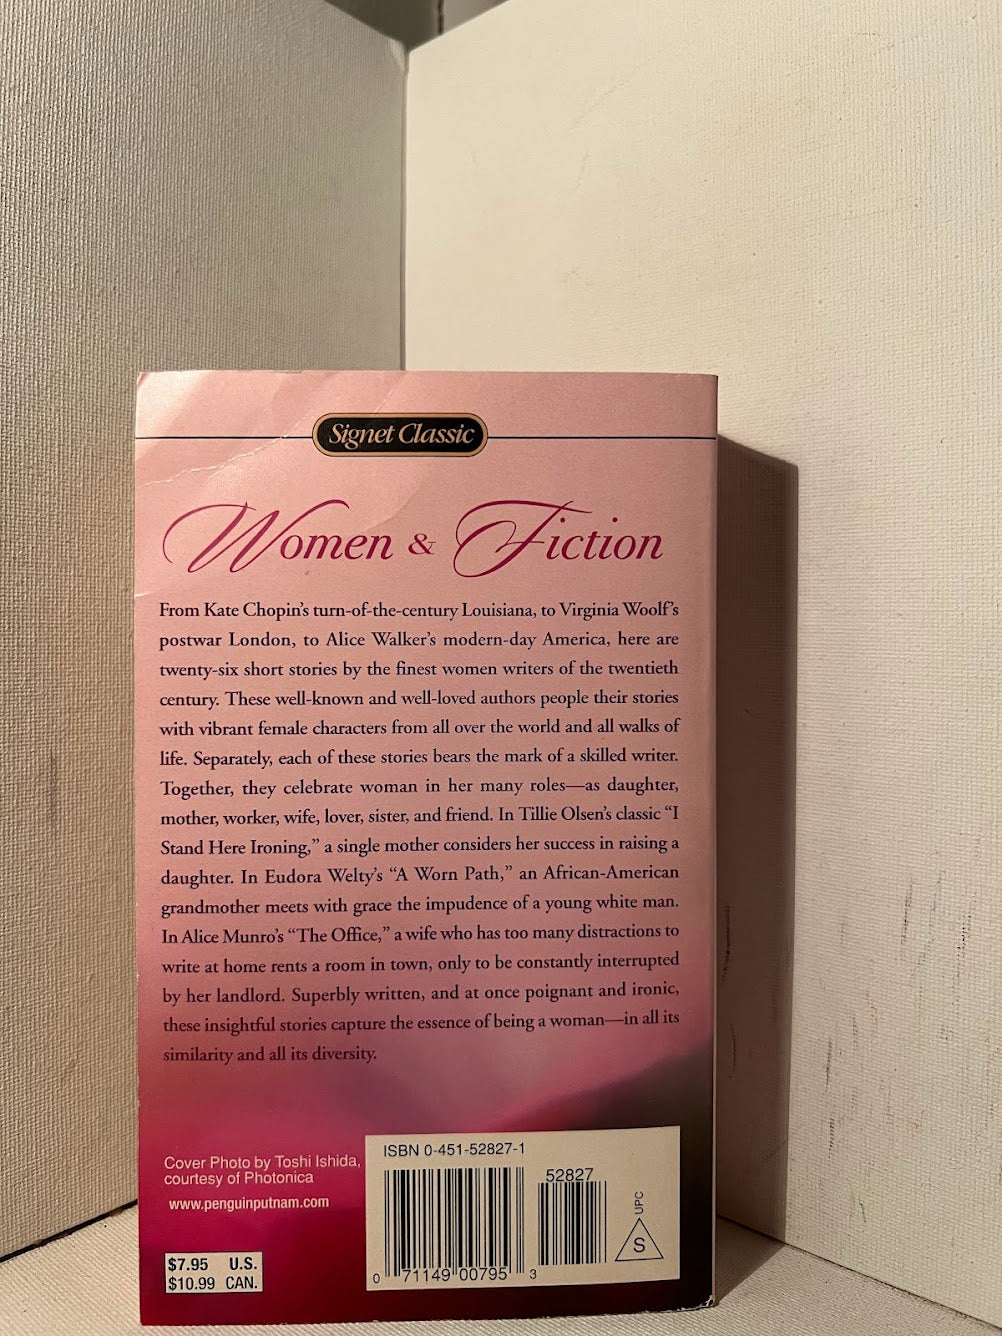 Women & Fiction: Short Stories By and About Women edited by Susan Cahill